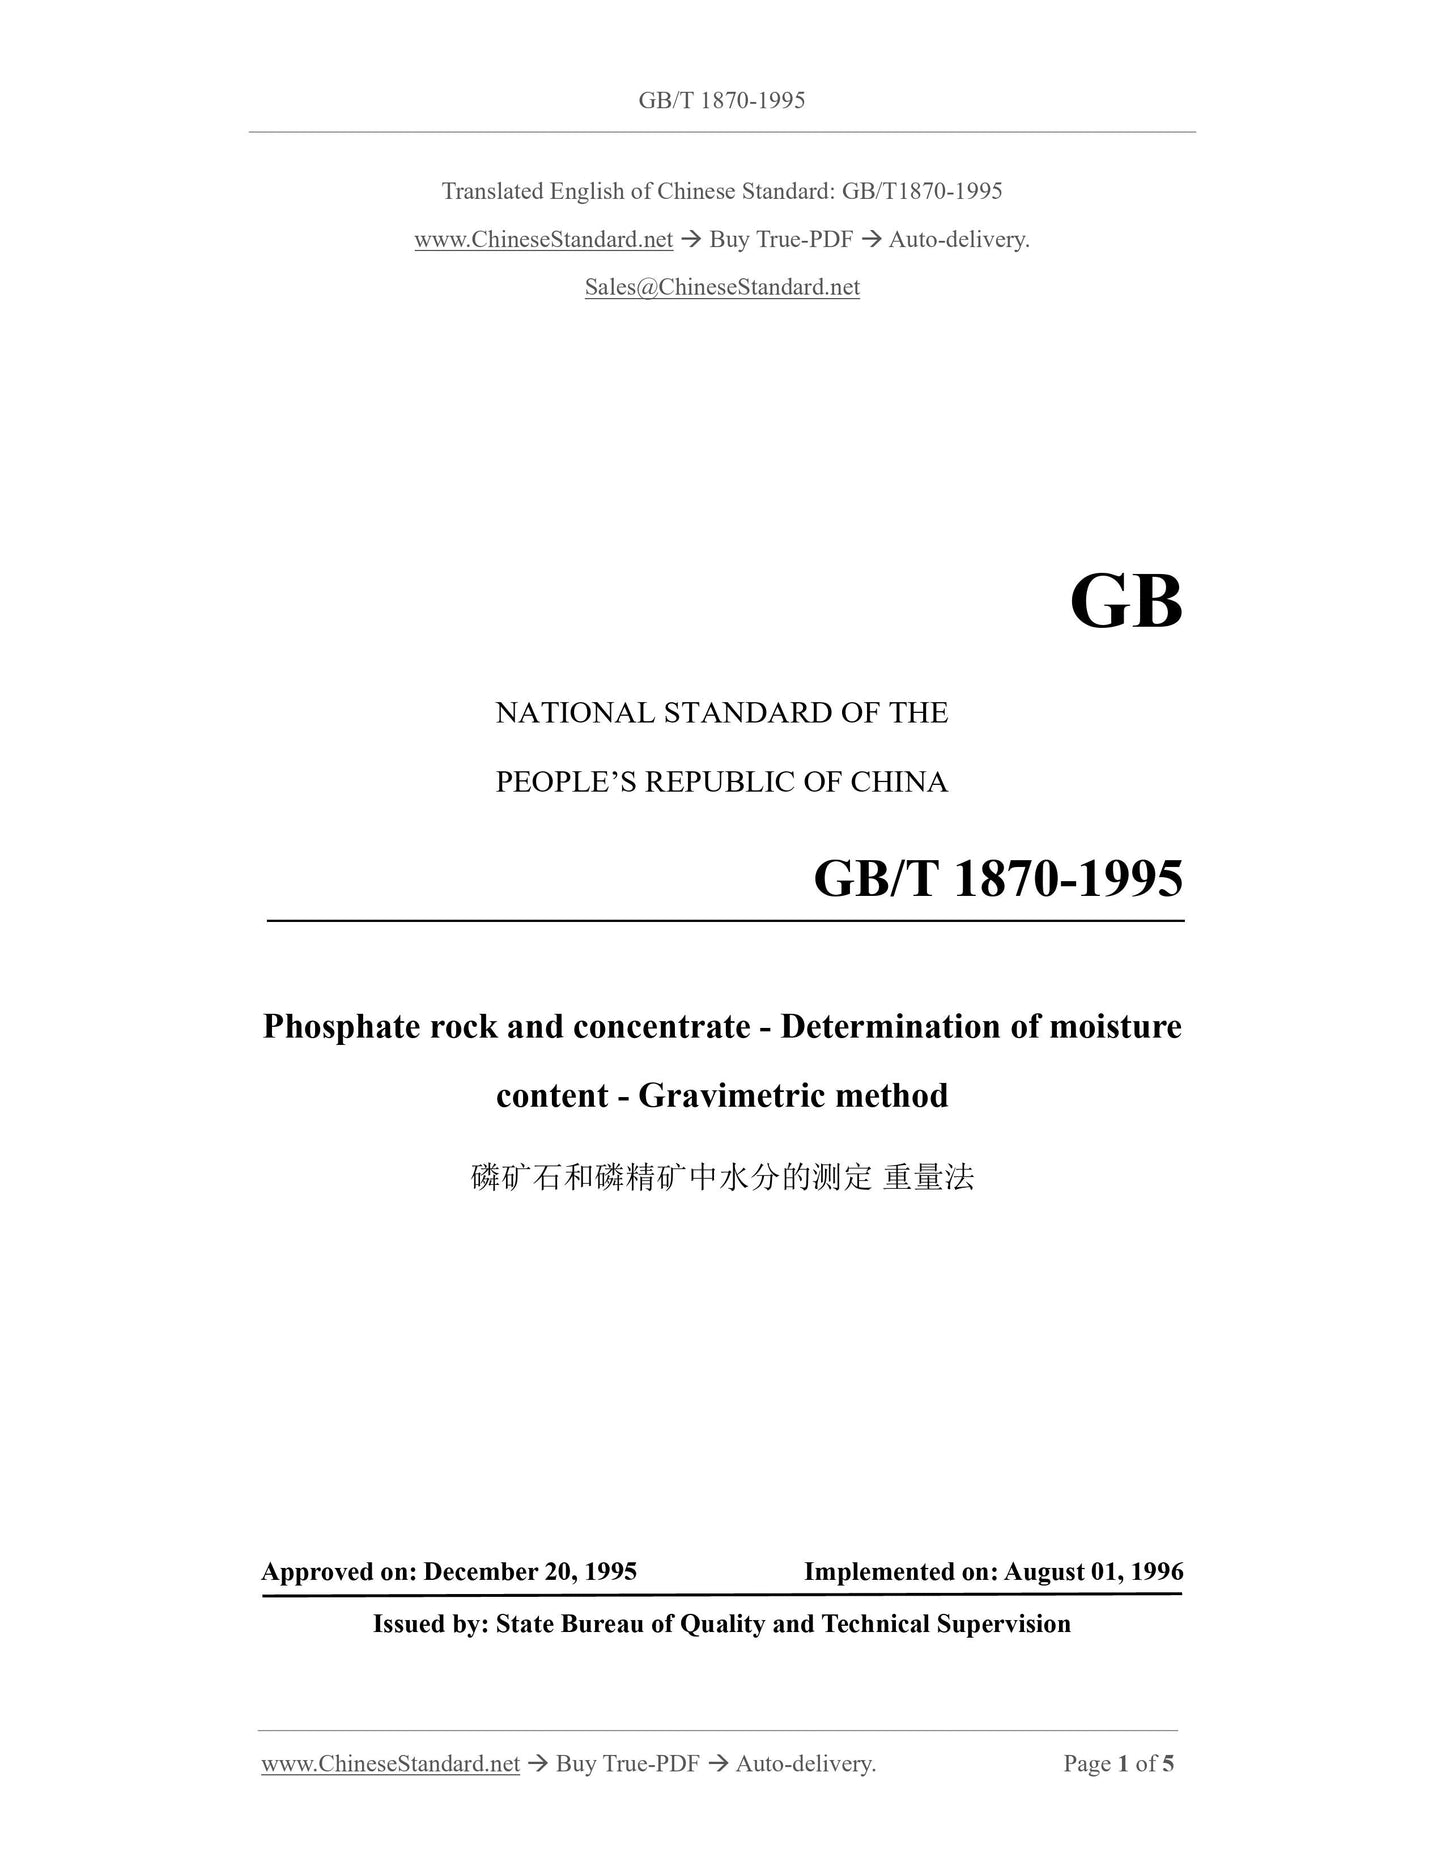 GB/T 1870-1995 Page 1